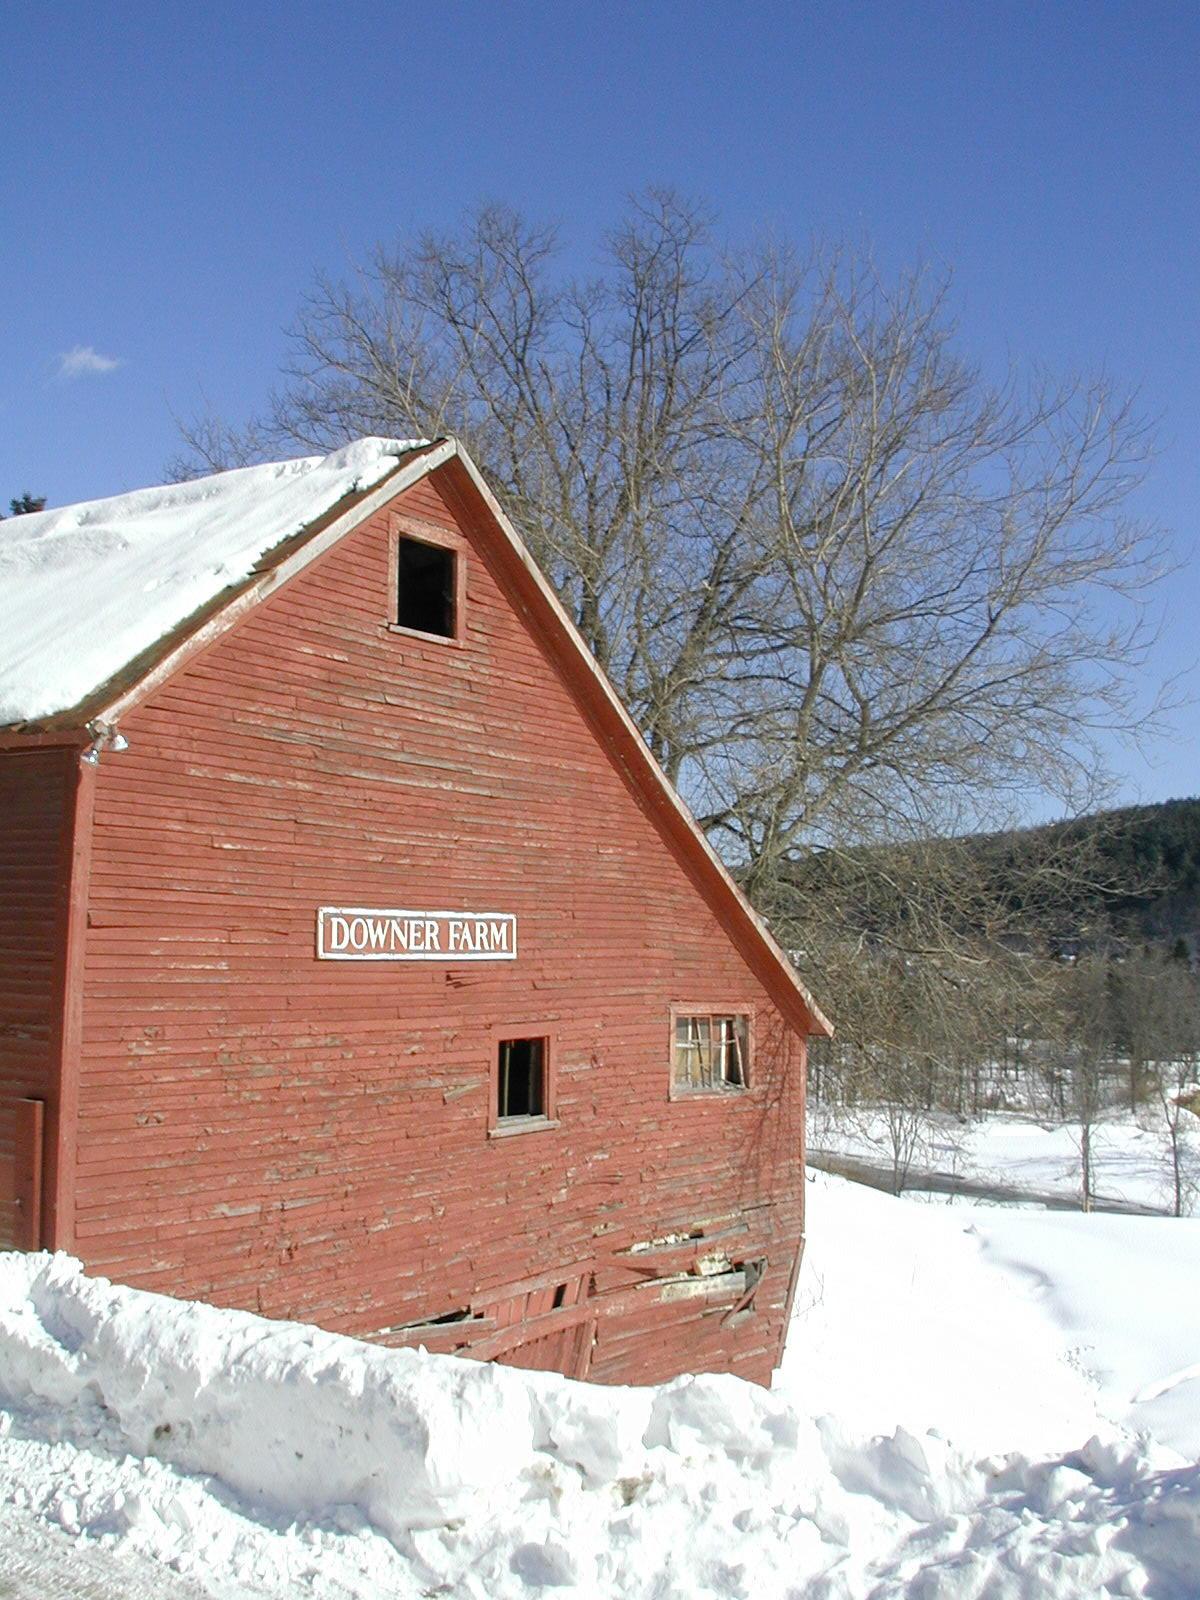 Downer Farm Barn (user submitted)